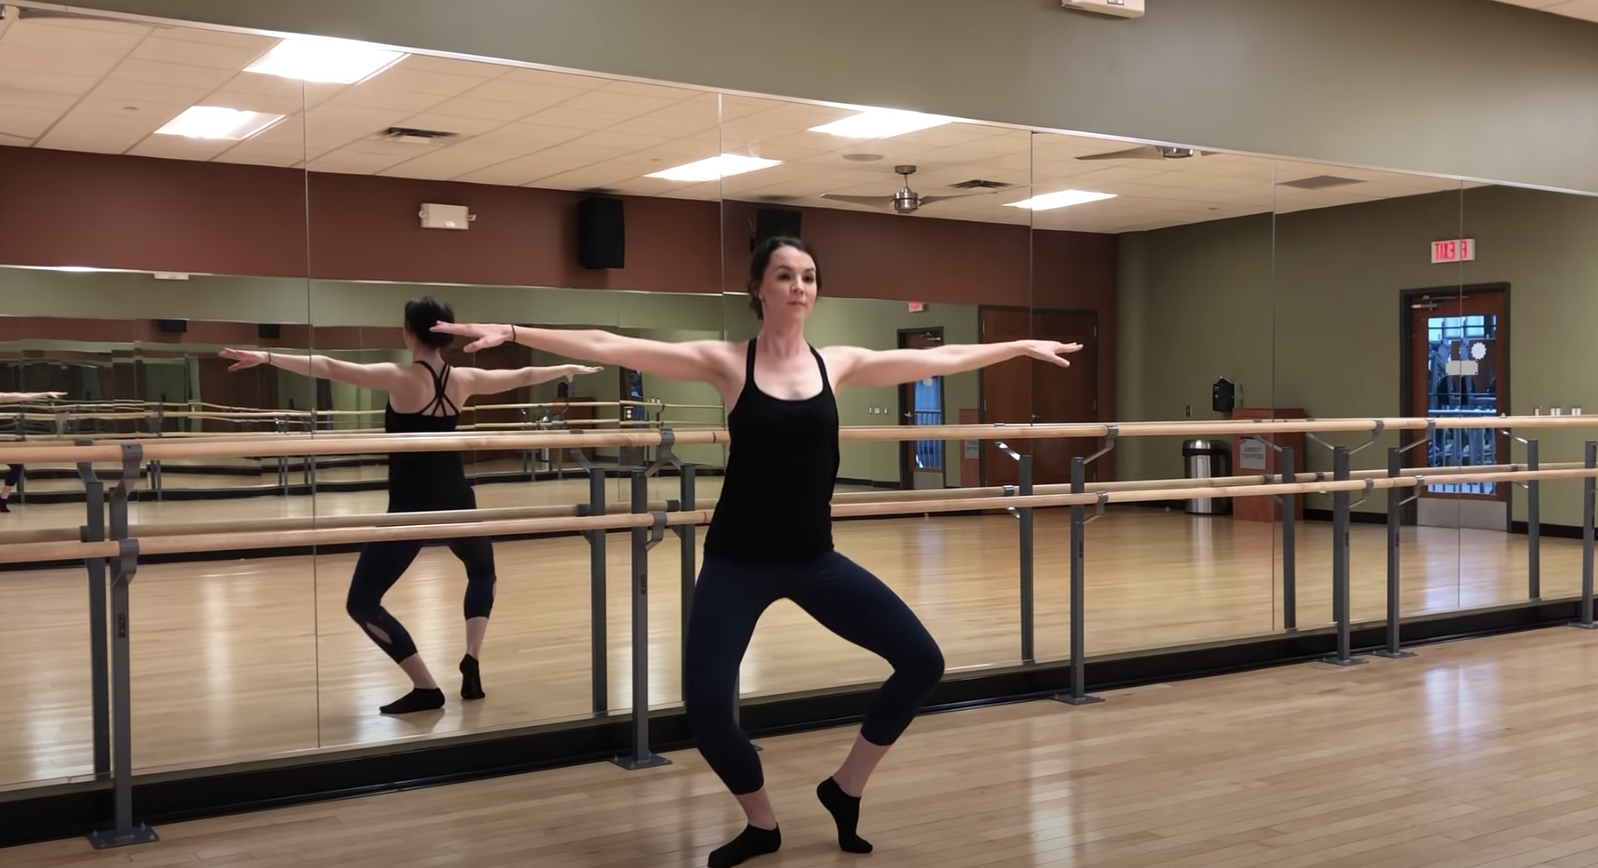 YouTuber Coach Kel doing a barre exercise